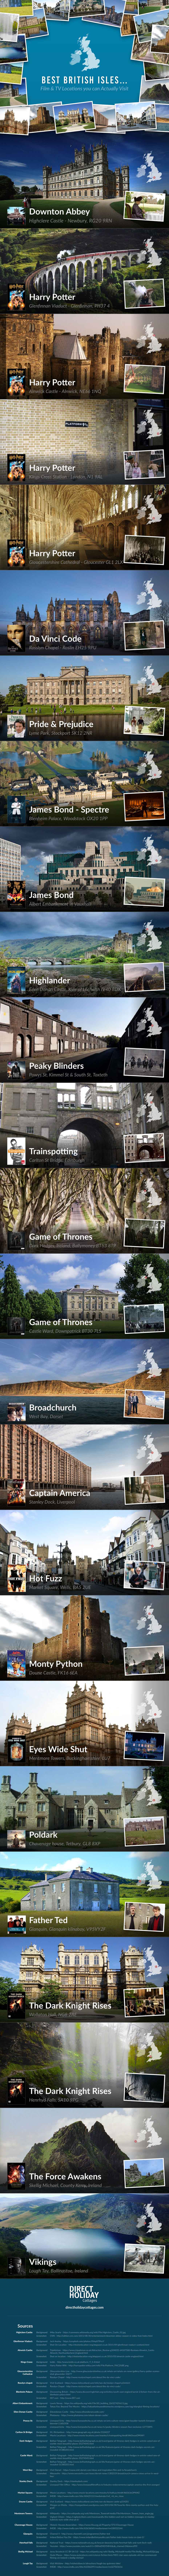 British Isles Film & TV Locations You Can Visit